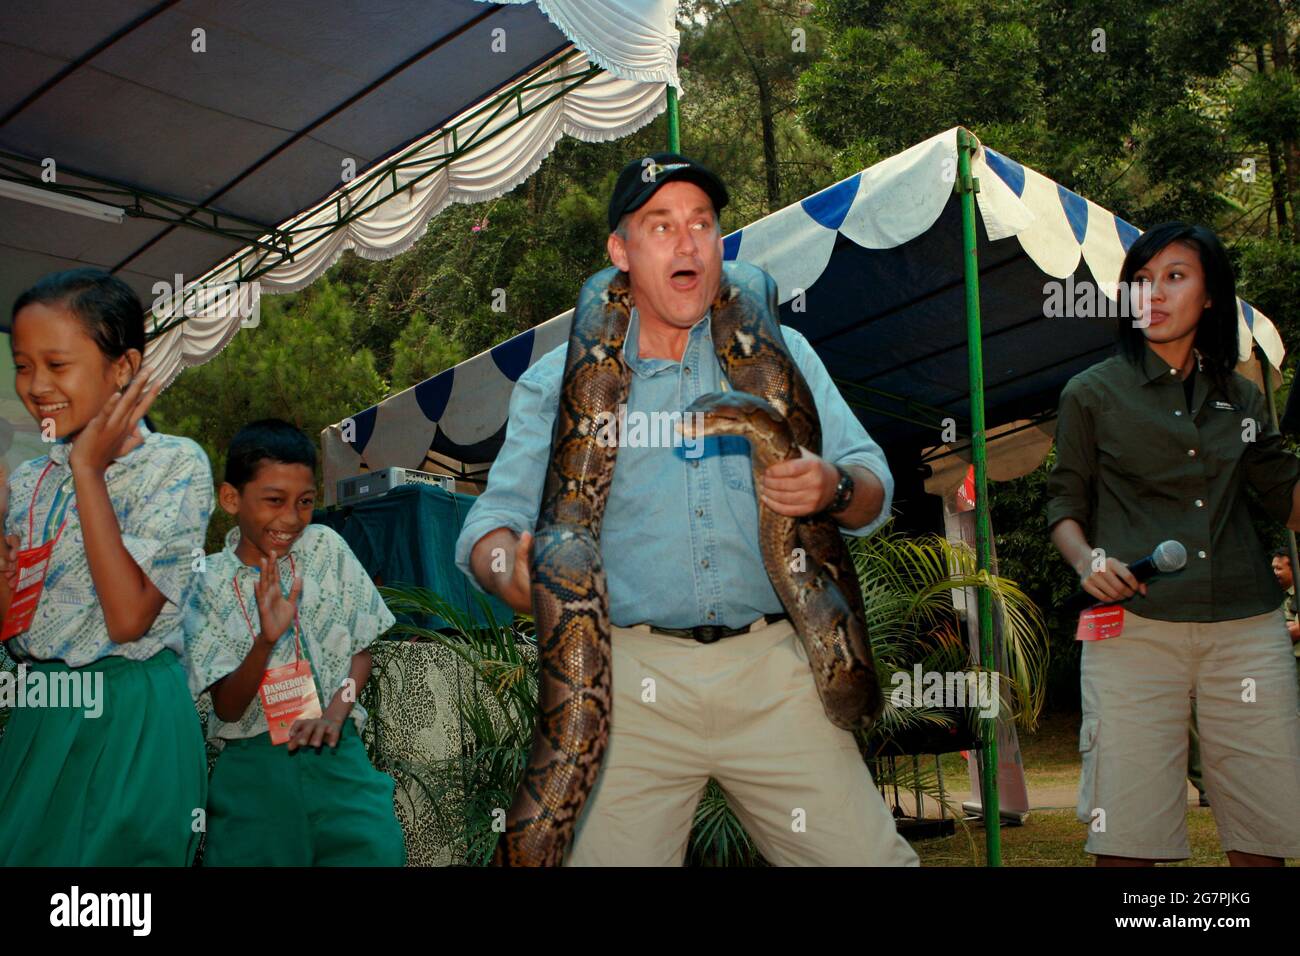 Bogor, West Java, Indonesia. 26th July 2006. Herpetologist Brady Barr during an event to promote 'Dangerous Encounters: Brady's Croc Adventure', an educational TV program aired on National Geographic Channel. The event is held at Taman Safari Indonesia in Cisarua, Bogor, West Java, Indonesia. Stock Photo